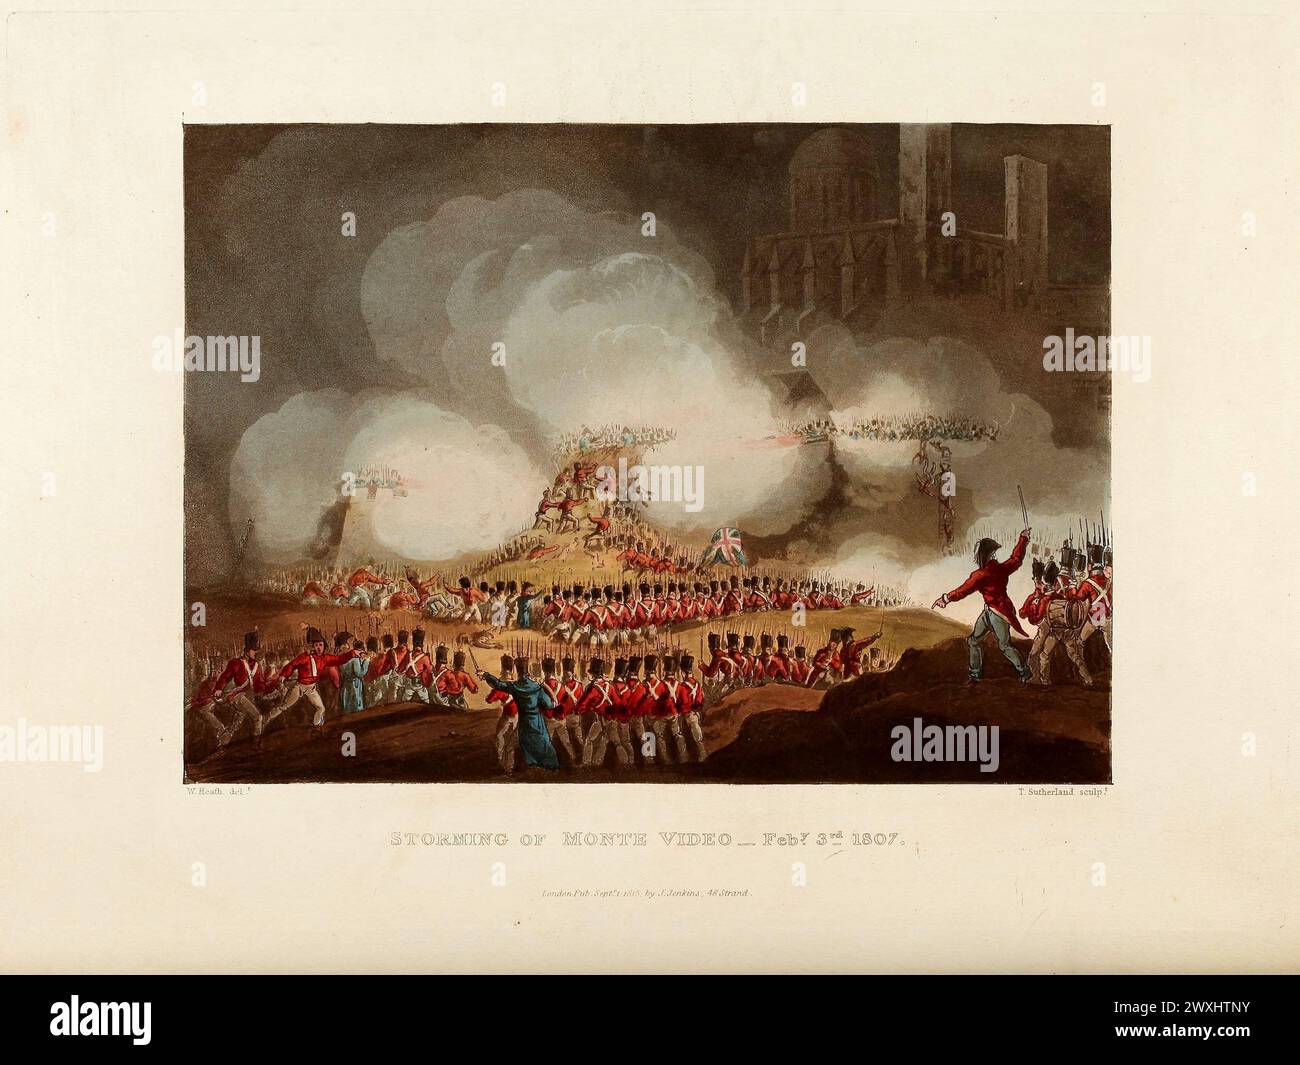 Storming of Monte Video, Feb 3, 1807. Vintage Coloured Aquatint, published by James Jenkins, 1815,  from  The martial achievements of Great Britain and her allies : from 1799 to 1815. Stock Photo